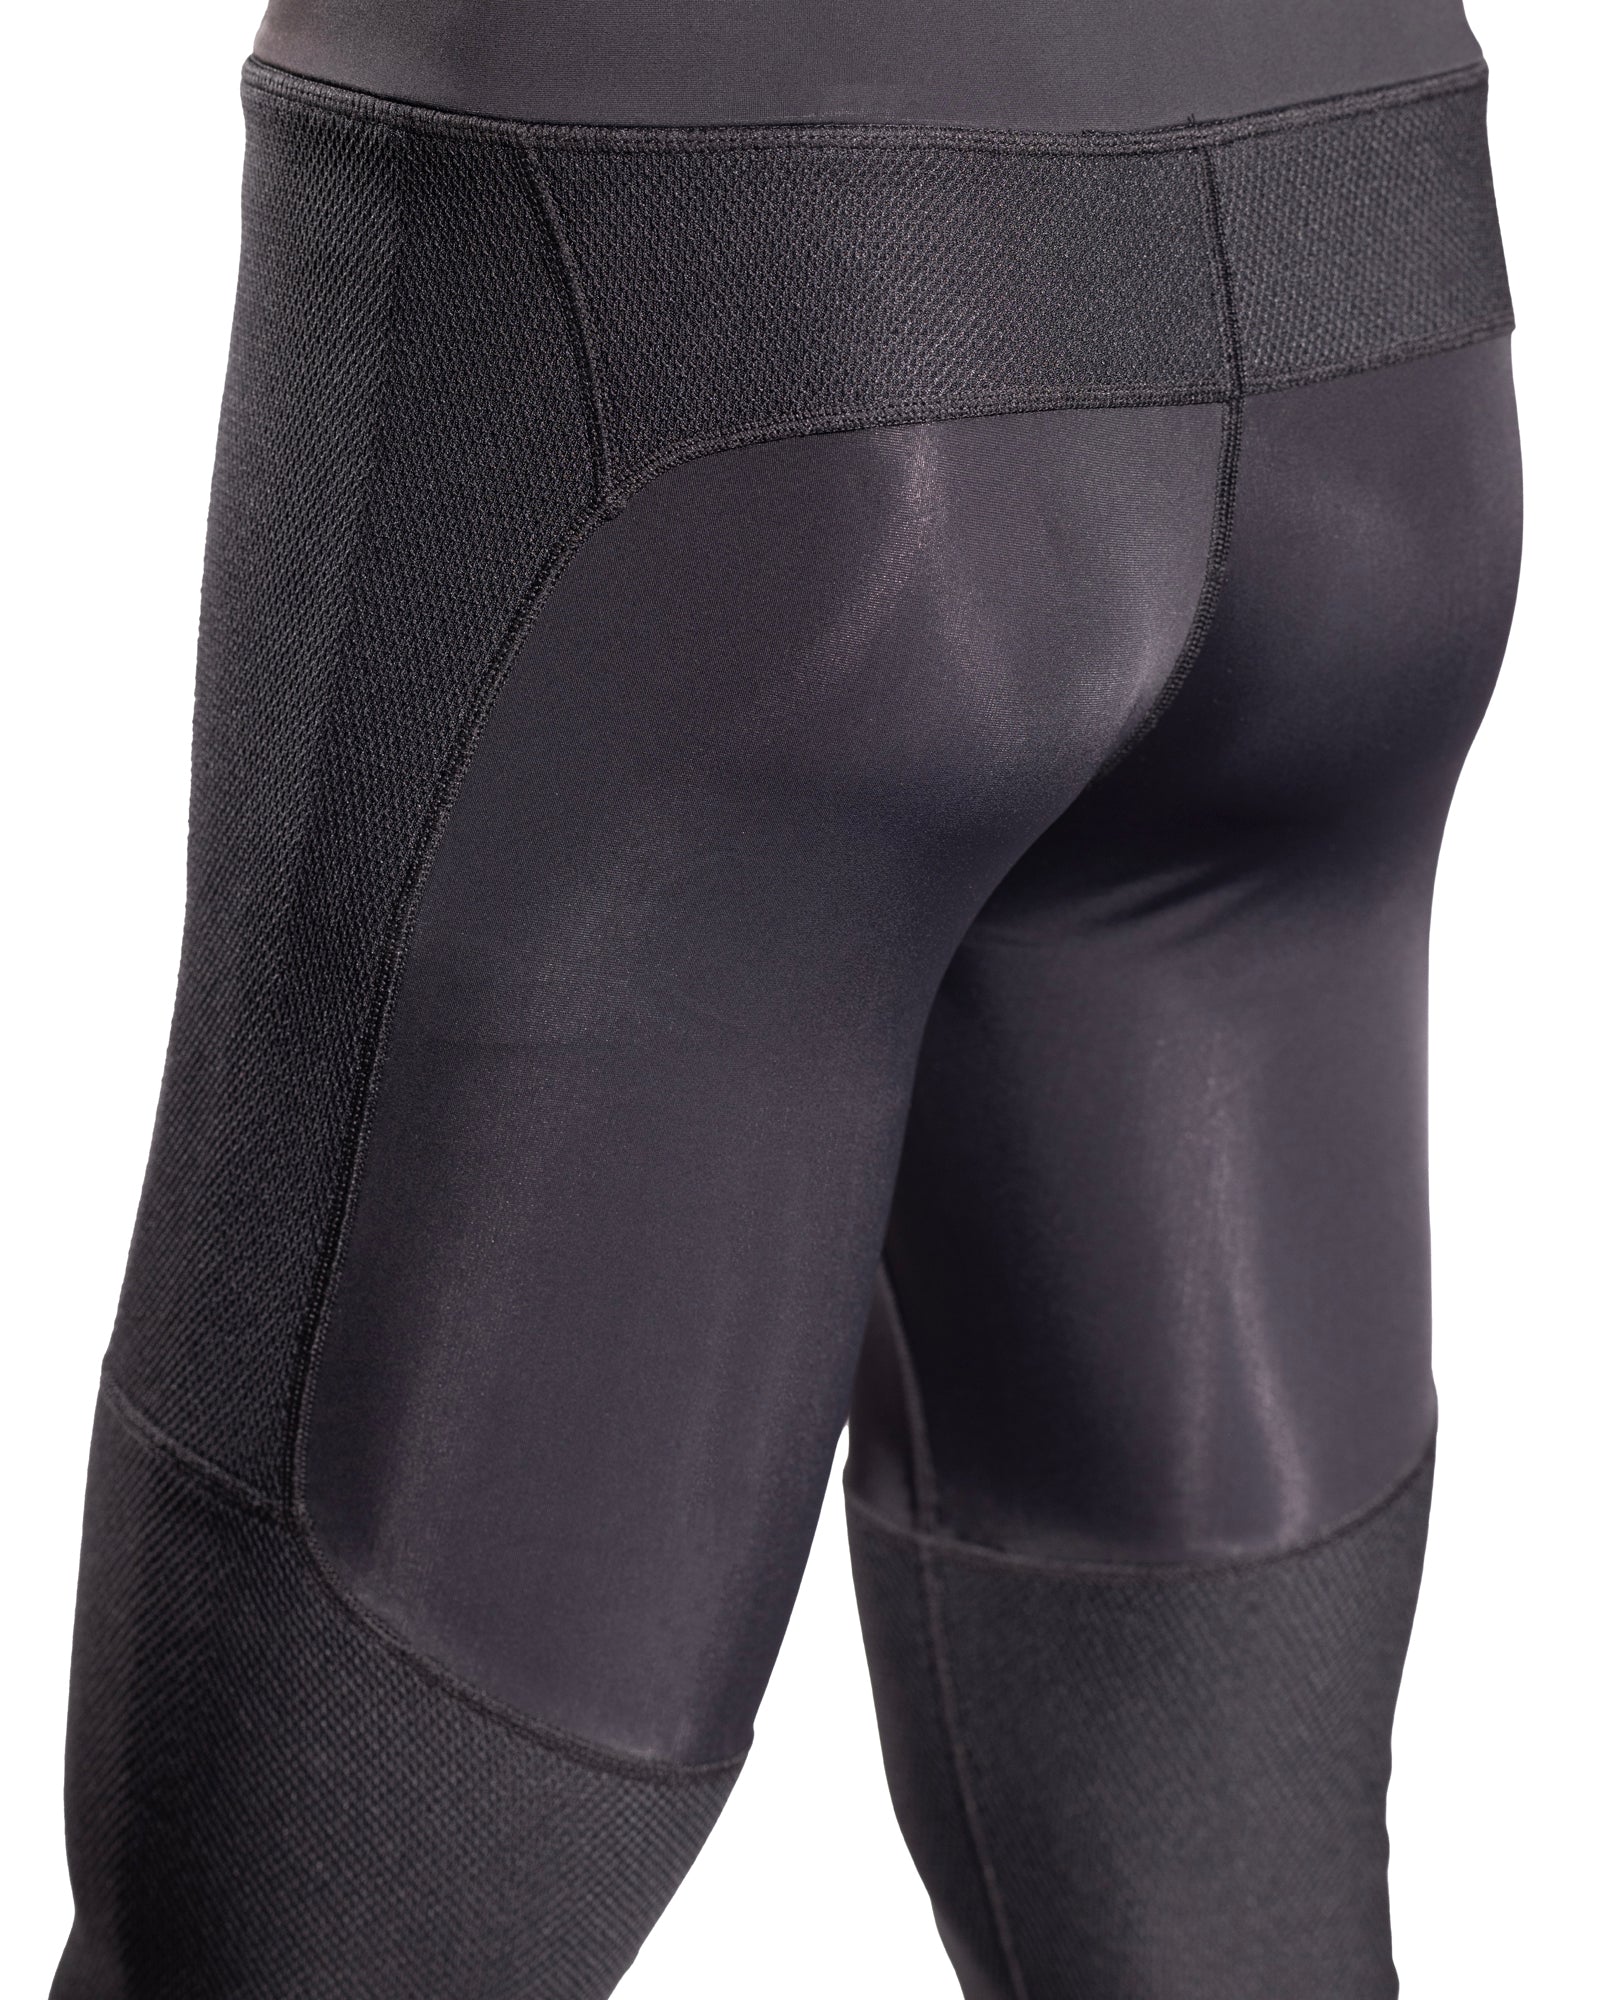 Men’s Dynamic Active Recovery Legging